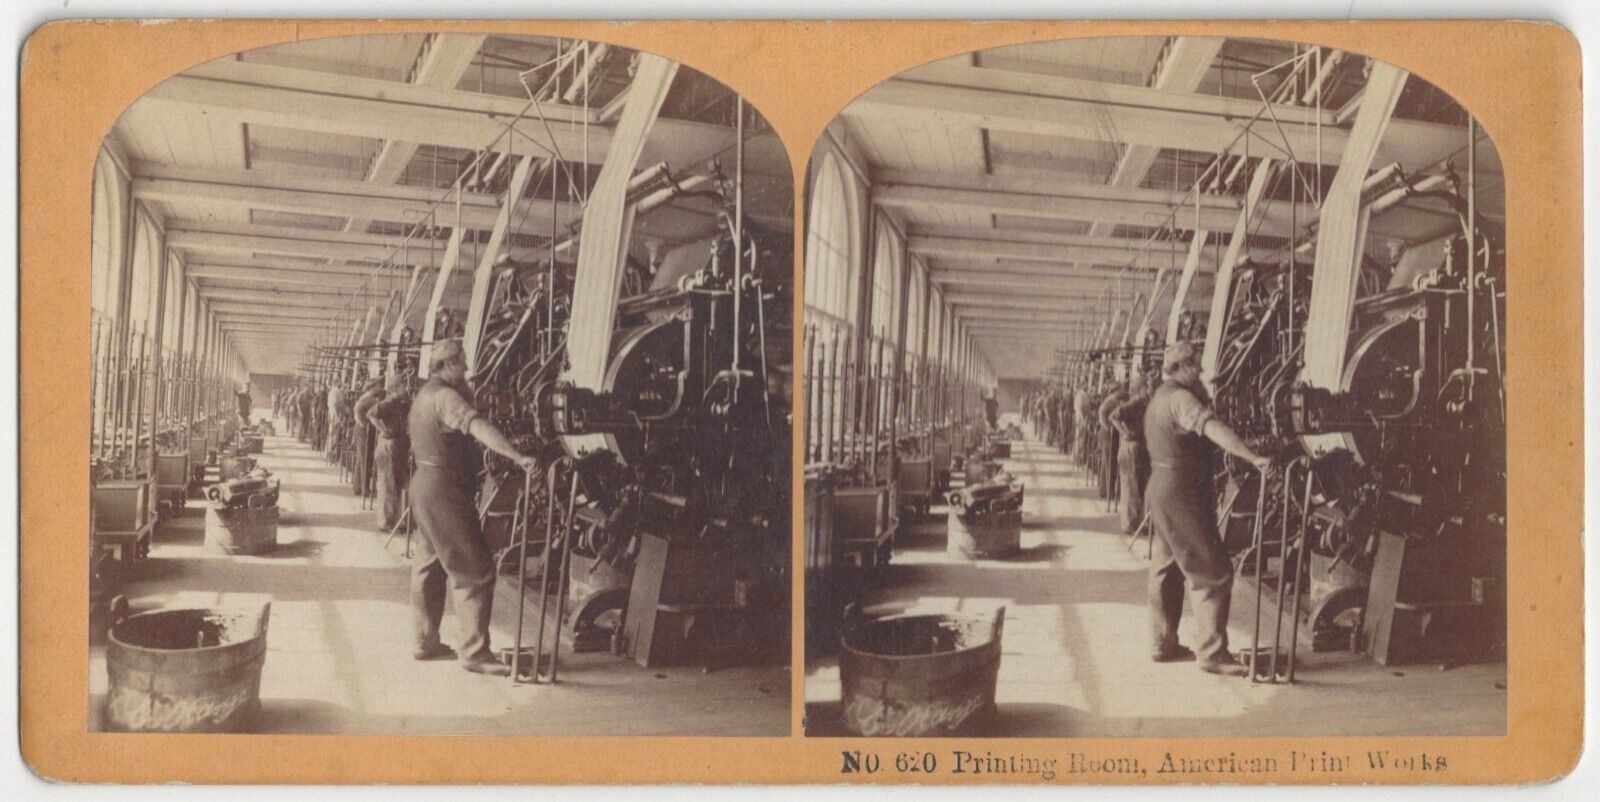 1870's Mount Hope Bay, Rhode Island - Occupational Stereoview, Printing Presses